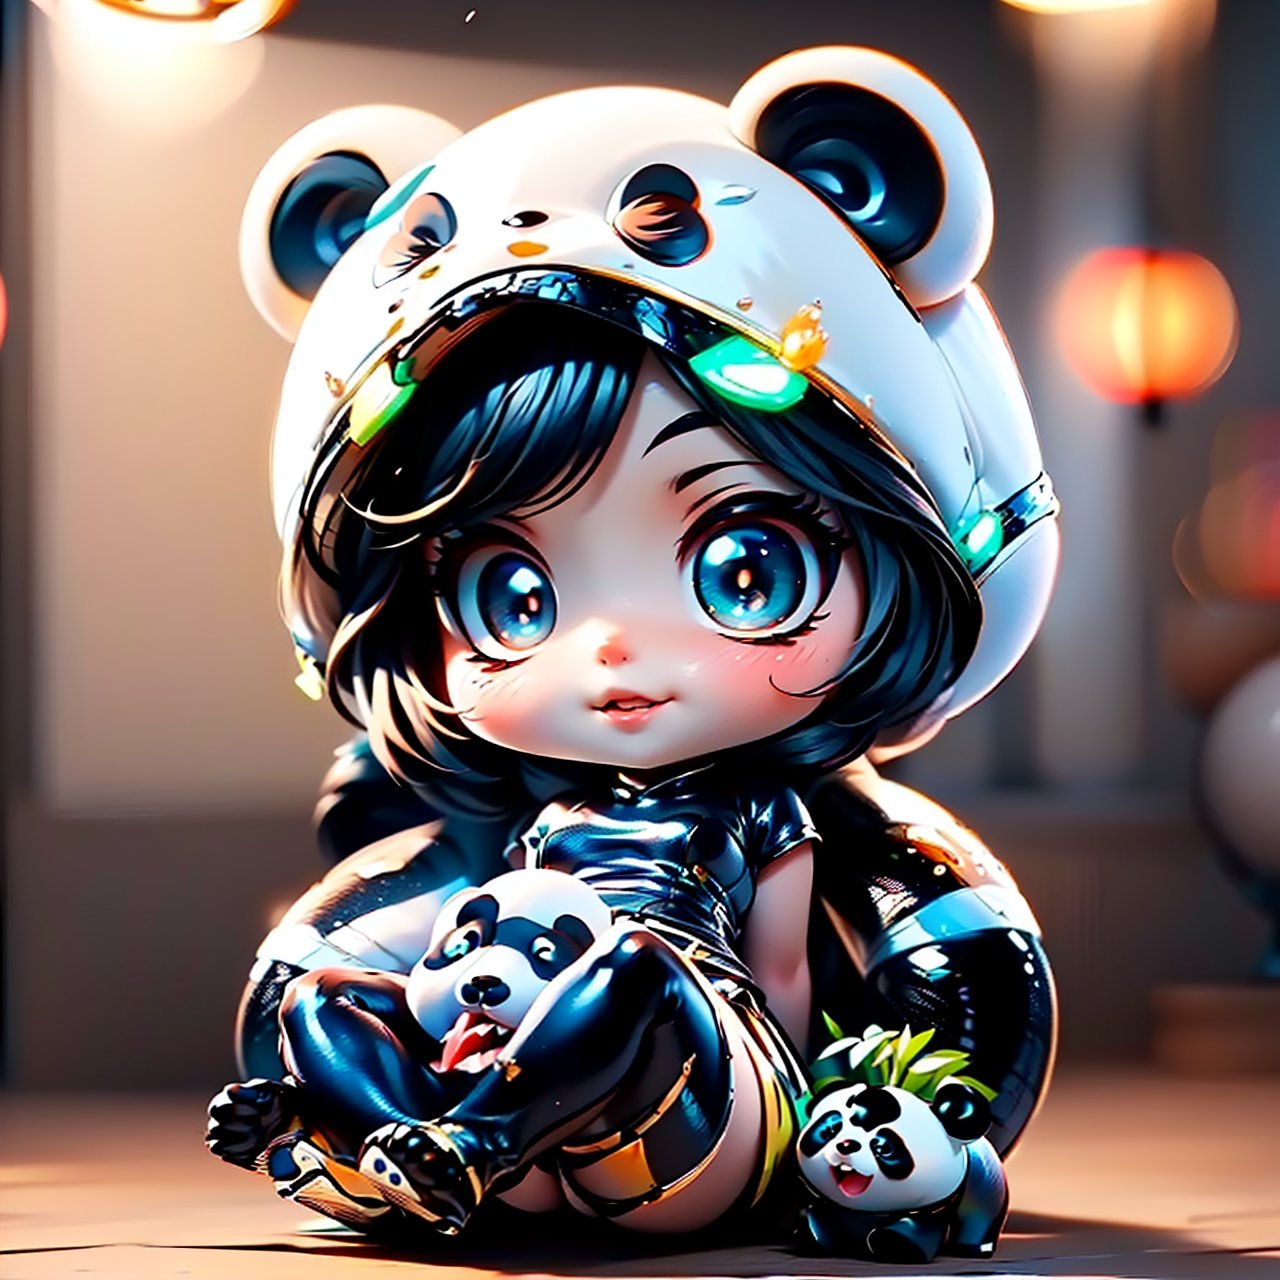 (1panda girl:1.3, solo), (a extremely pretty and beautiful panda girl), (Taoist:1.3), (25years old:1.0), (chibi emoto:1.3), (arms behind back between legs:1.3), ( attractive random posing:1.3), (at the concole room:1.3), (looking straight at you:1.3), (starring at you:1.3), (front view:1.3),
break,
beautiful eyes, princess eyes, (big eyes:1.3), (slender:1.1 ), (small-medium-breasts:0.95), (thin waist: 1.15), (detailed beautiful panda girl: 1.4), Parted lips, Red lips , full-make-up face, (shiny skin), ((Perfect Female Body )) , (full body:1.3), Perfect Anatomy, Perfect Proportions, (extremely cute and beautiful Panda face:1.3),
BREAK,
(View viewer, wearing a sexy Taoist uniform, (detailed elegant outfit:1.3), (red taoist uniform:1.3), detailed clothes,
BREAK,
(detailed cyber room background:1.2), (dark background), (Studio soft lighting: 1.3), (fake lights: 1.3), (backlight: 1.3), BREAK, (Realistic, Photorealistic: 1.37), (Masterpiece, Best Quality : 1.2), (Ultra High Resolution: 1.2 ), (RAW Photo: 1.2), (Sharp Focus: 1.3), (Face Focus: 1.2), (Ultra Detailed CG Unified 8k Wallpaper: 1.2), (Beautiful Skin: 1.2) , (pale Skin: 1.3), (Hyper Sharp Focus: 1.5), (Ultra Sharp Focus: 1.5), (Beautiful pretty face: 1.3), (super detailed background, detail background: 1.3), Ultra Realistic Photo, Hyper Sharp Image , Hyper Detail Image,cls_chibi